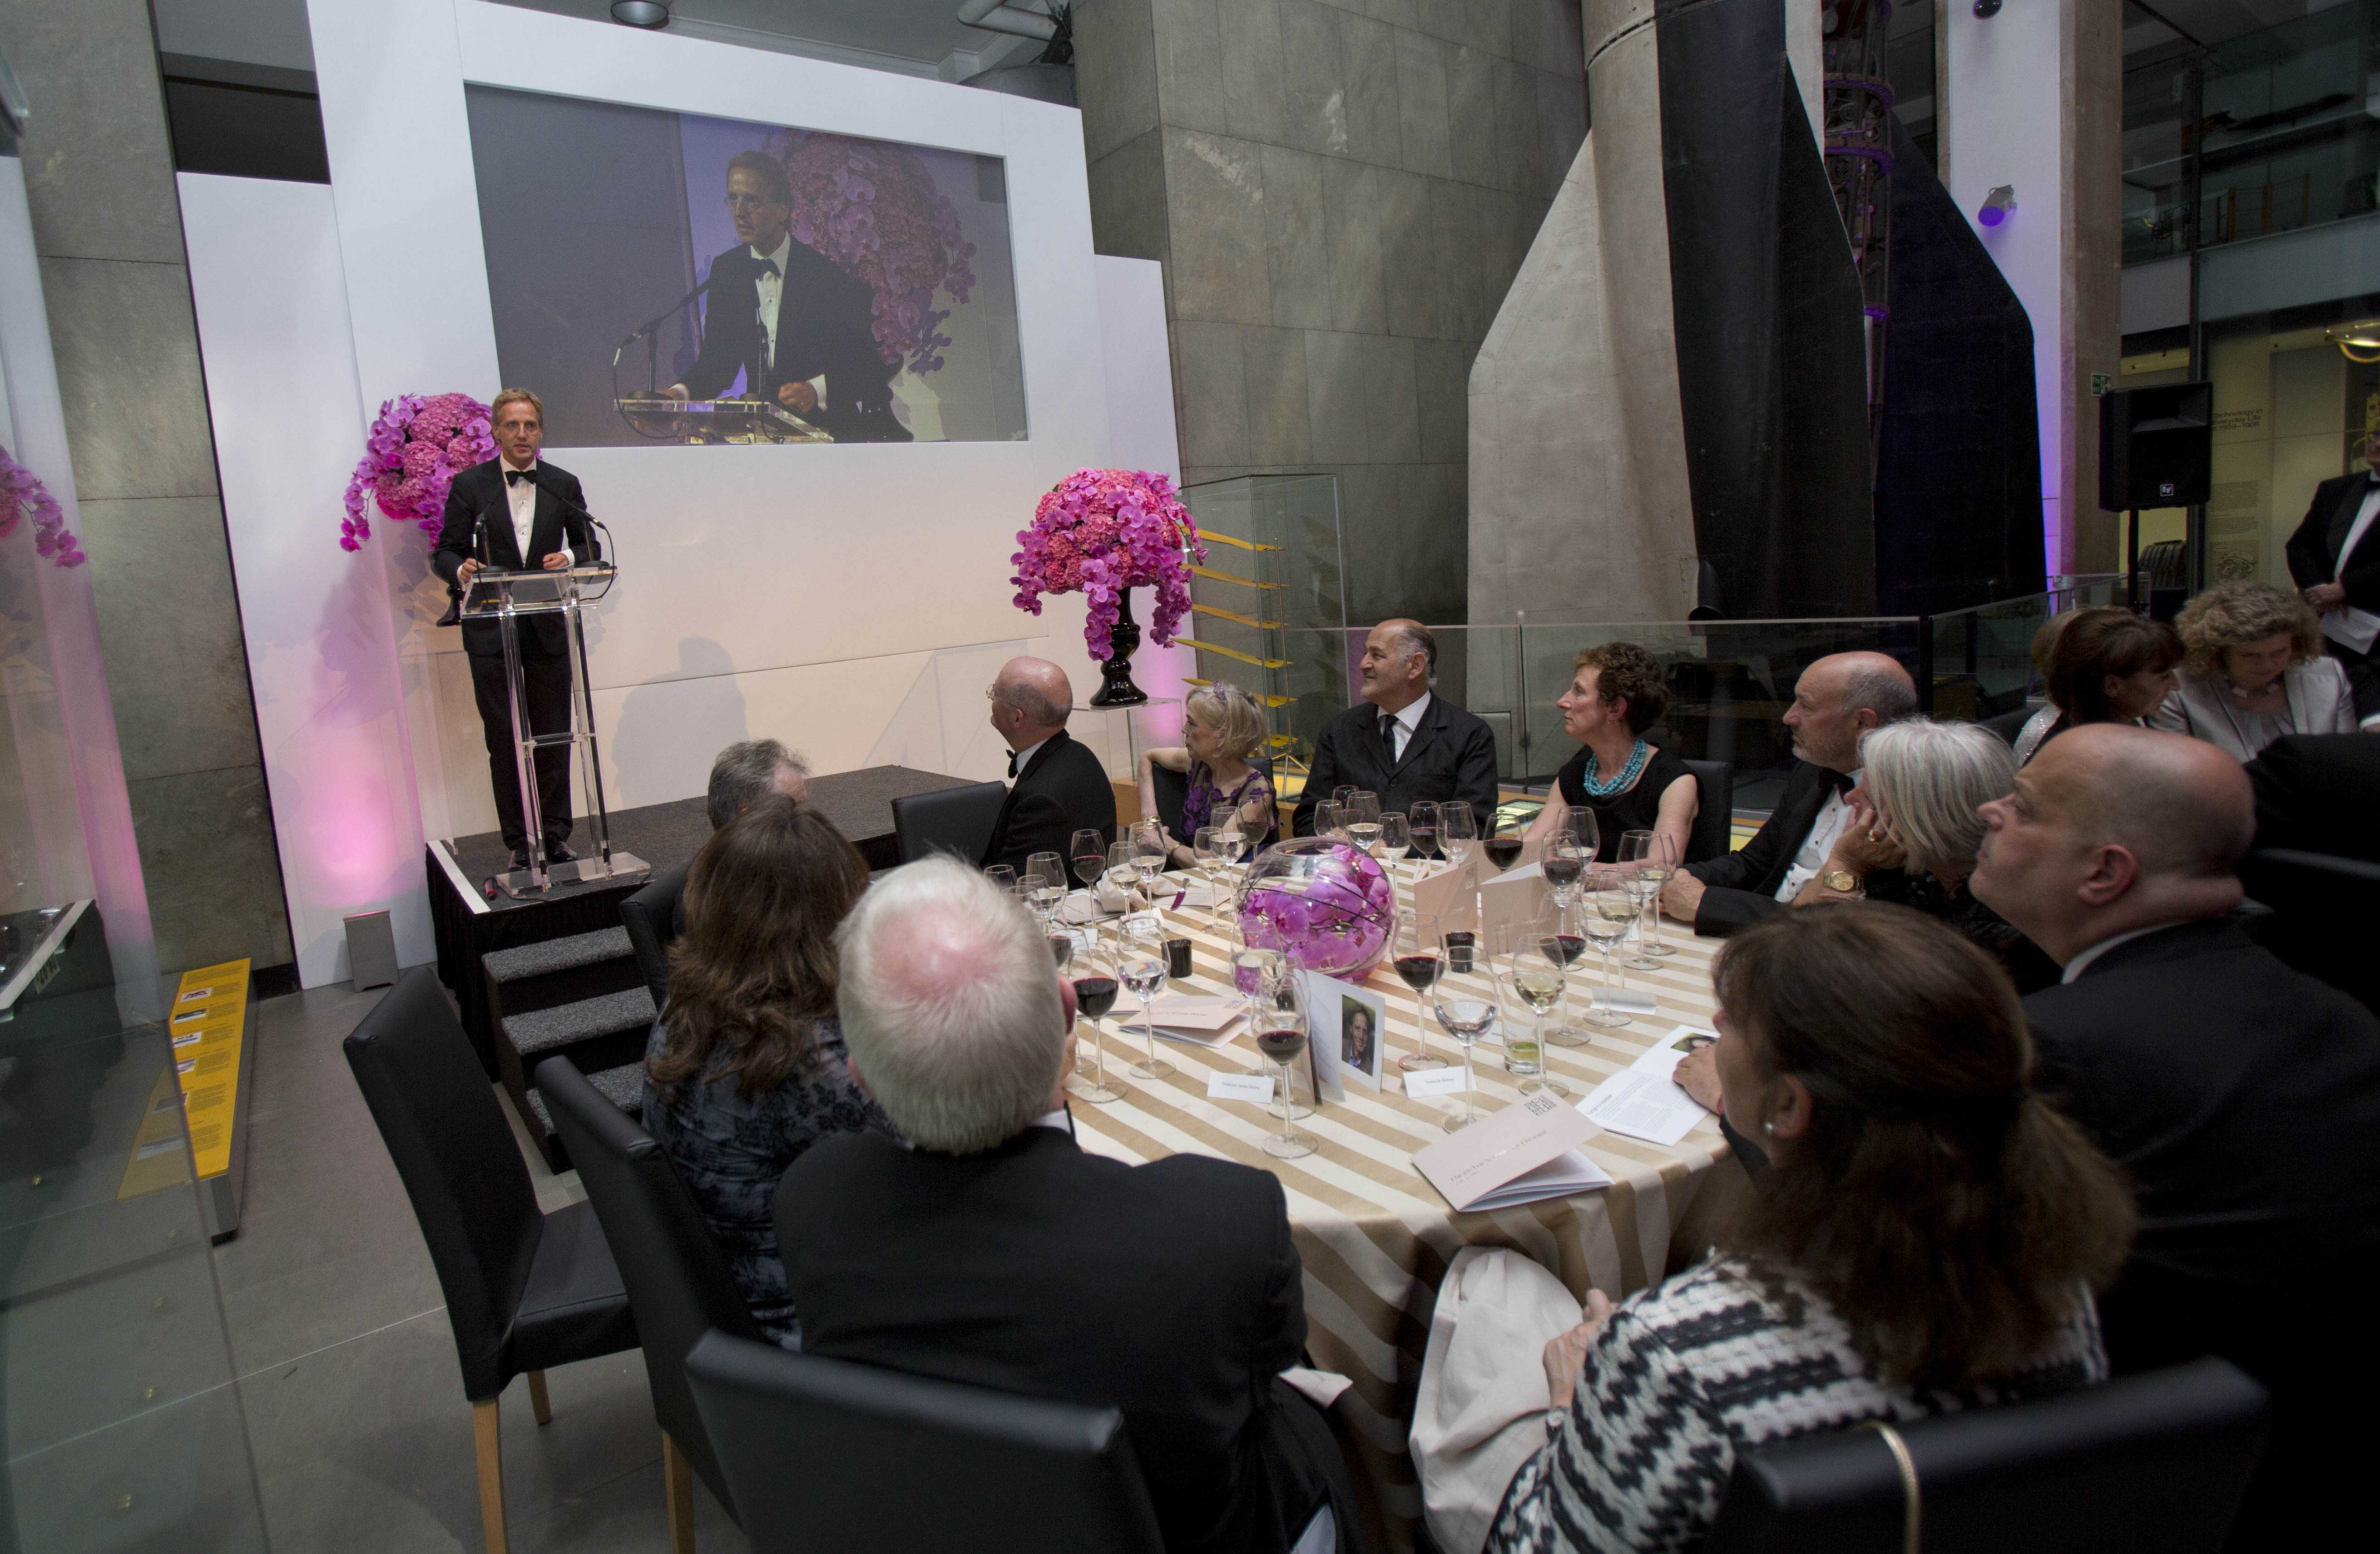 Professor Dr Robbert Dijkgraaf delivers a speech at the 2014 Science Museum Director's Annual Dinner © Tim Anderson